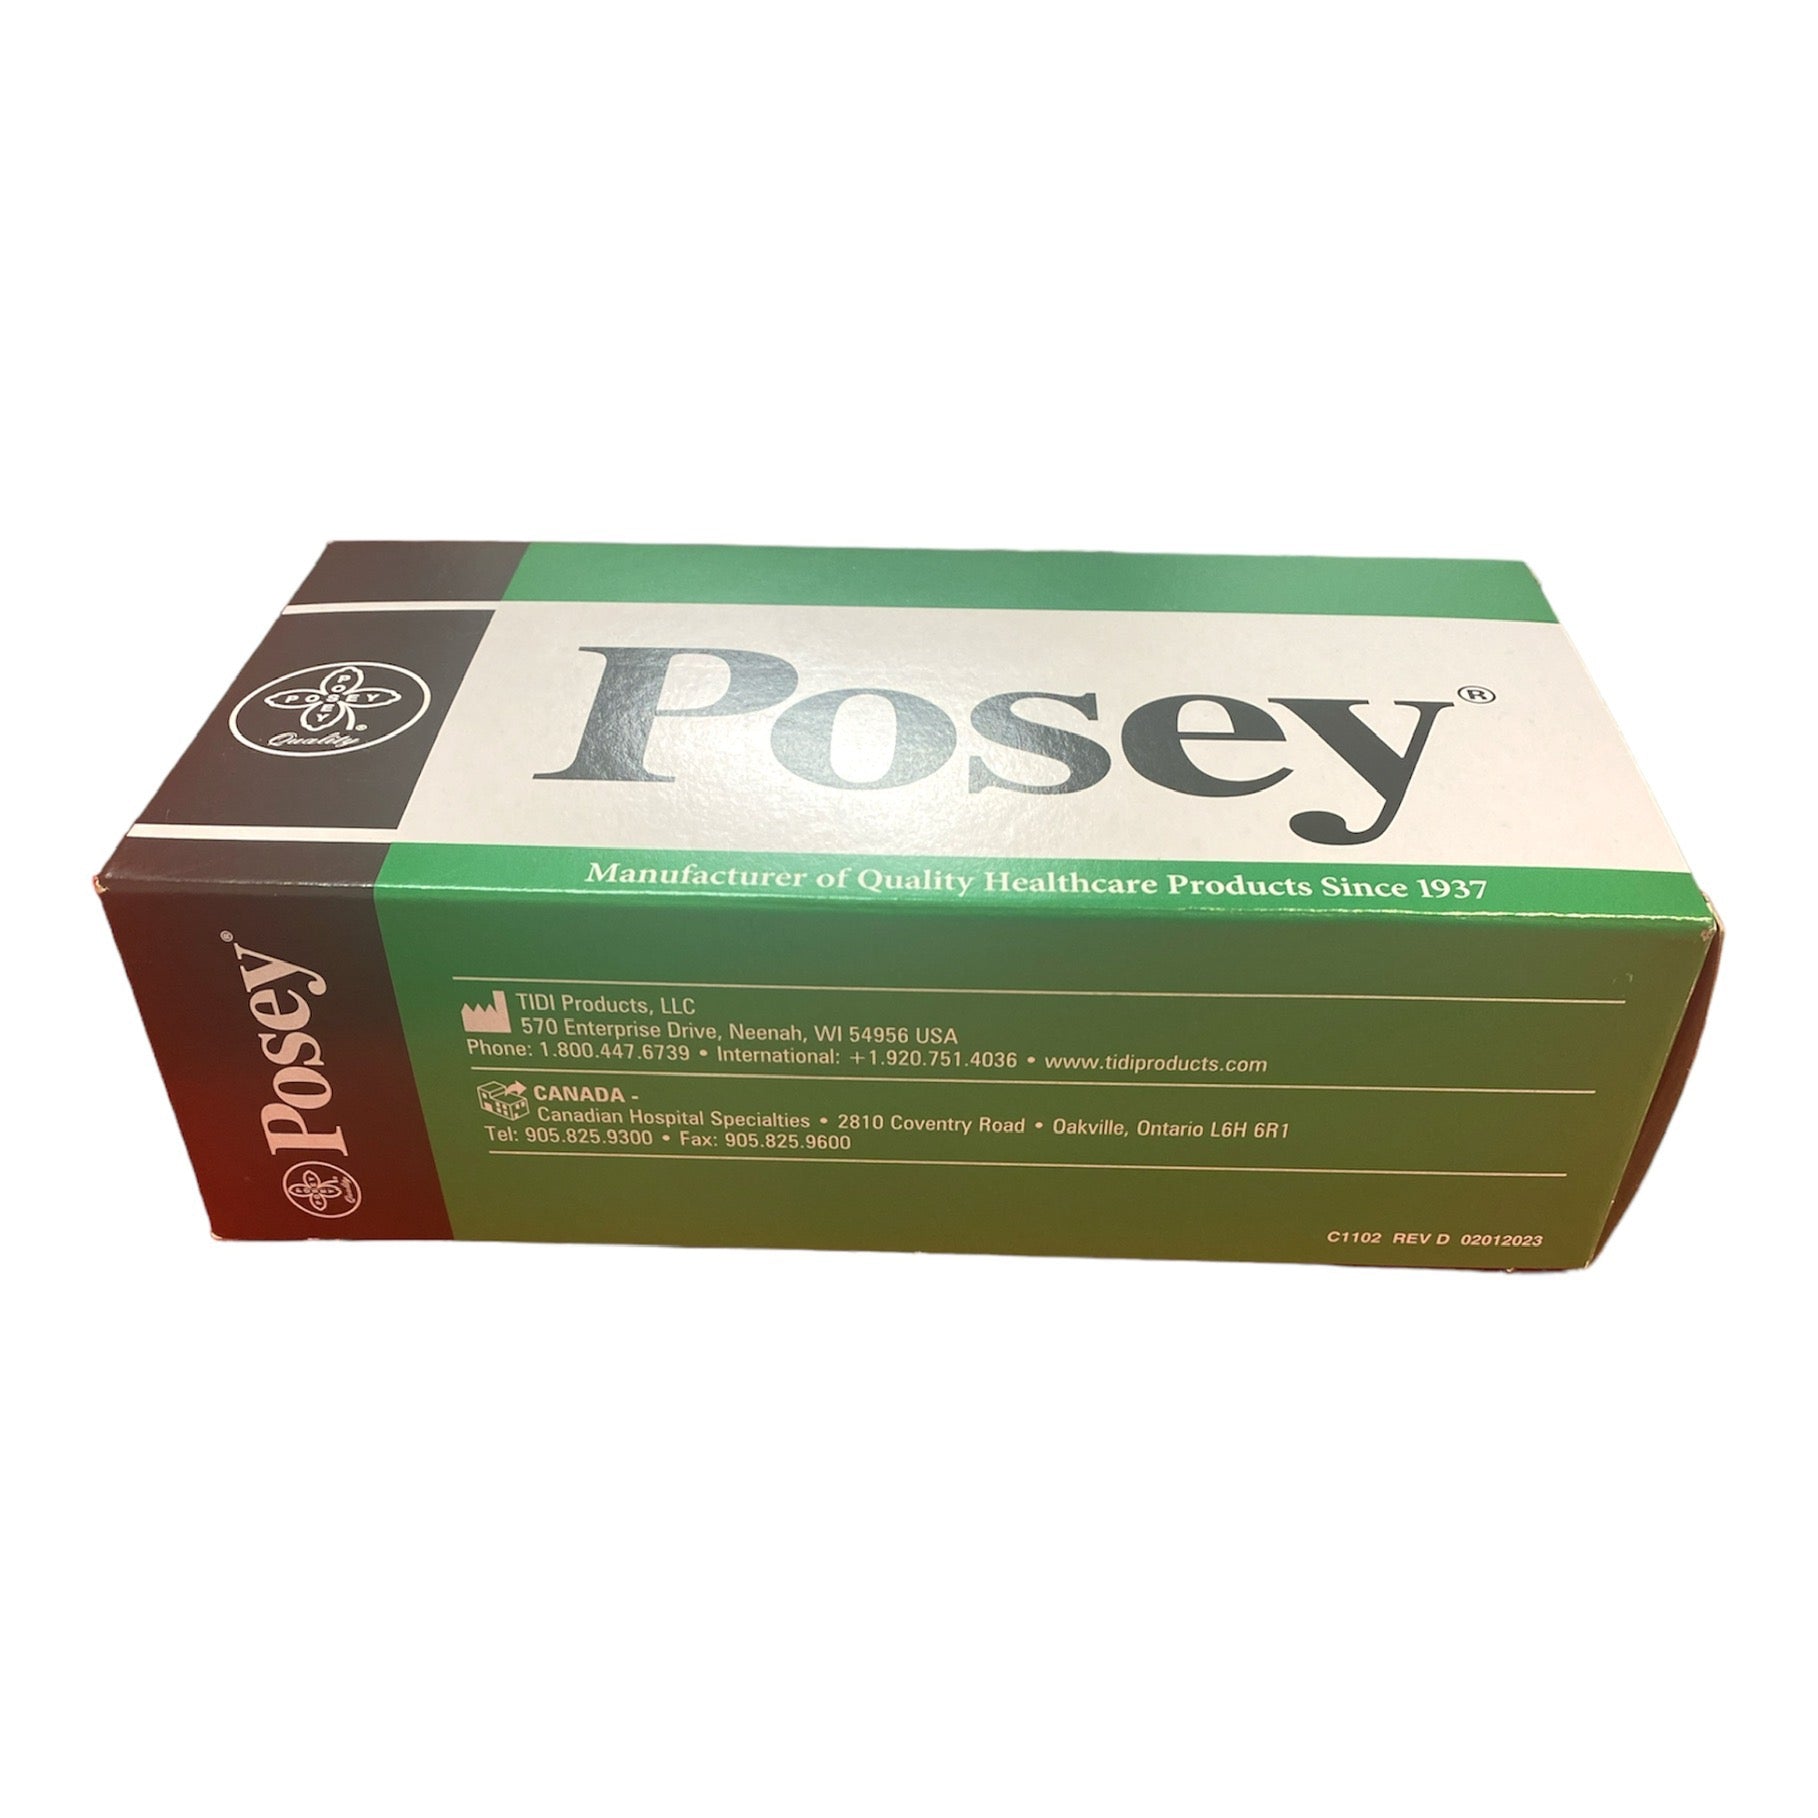 Posey-Incontinent-Sheath-Holder